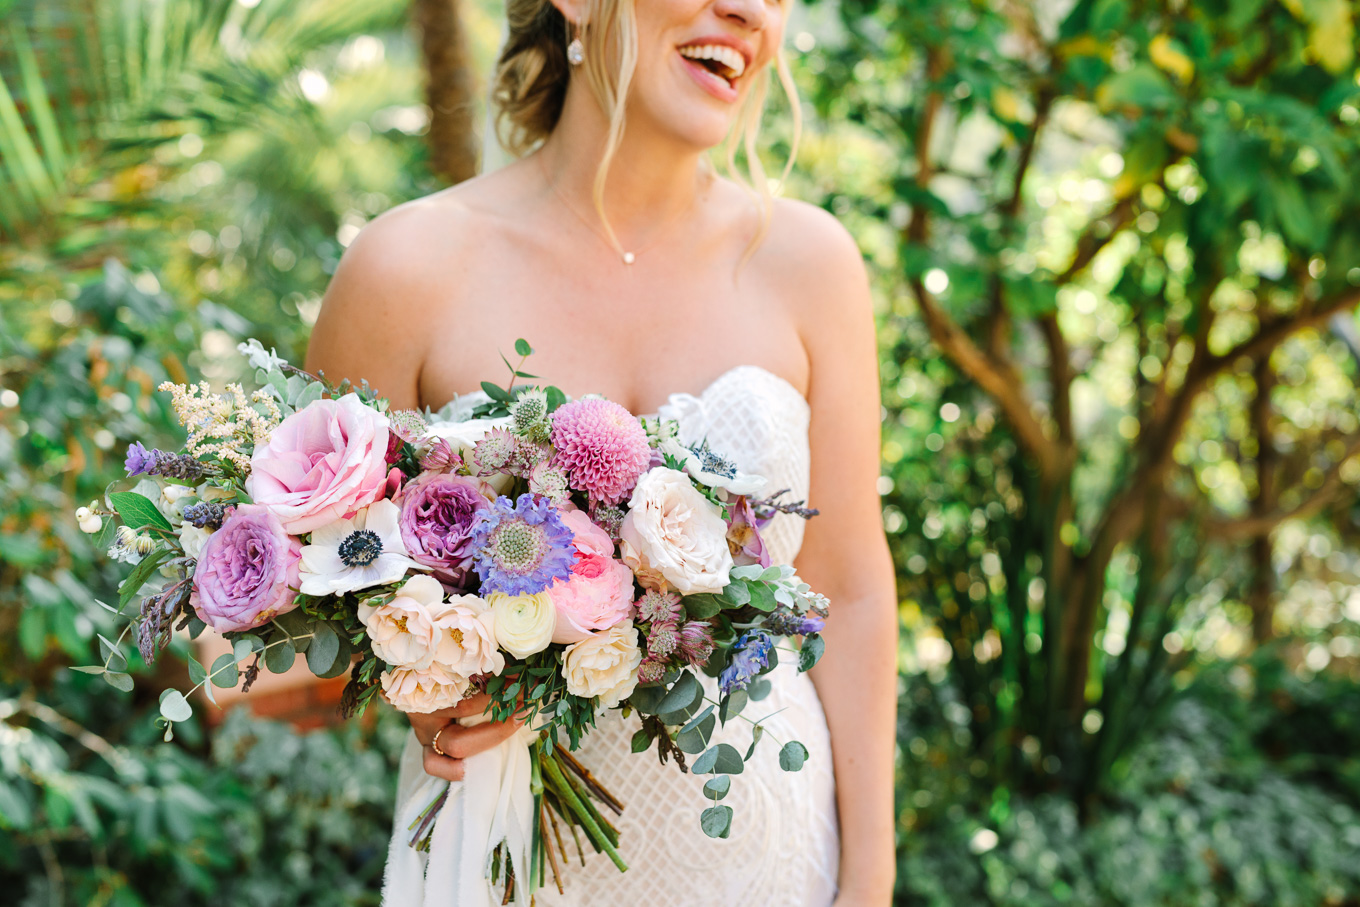 Bride with purple bouquet at Houdini Estate wedding | Best Southern California Garden Wedding Venues | Colorful and elevated wedding photography for fun-loving couples | #gardenvenue #weddingvenue #socalweddingvenue #bouquetideas #uniquebouquet   Source: Mary Costa Photography | Los Angeles 